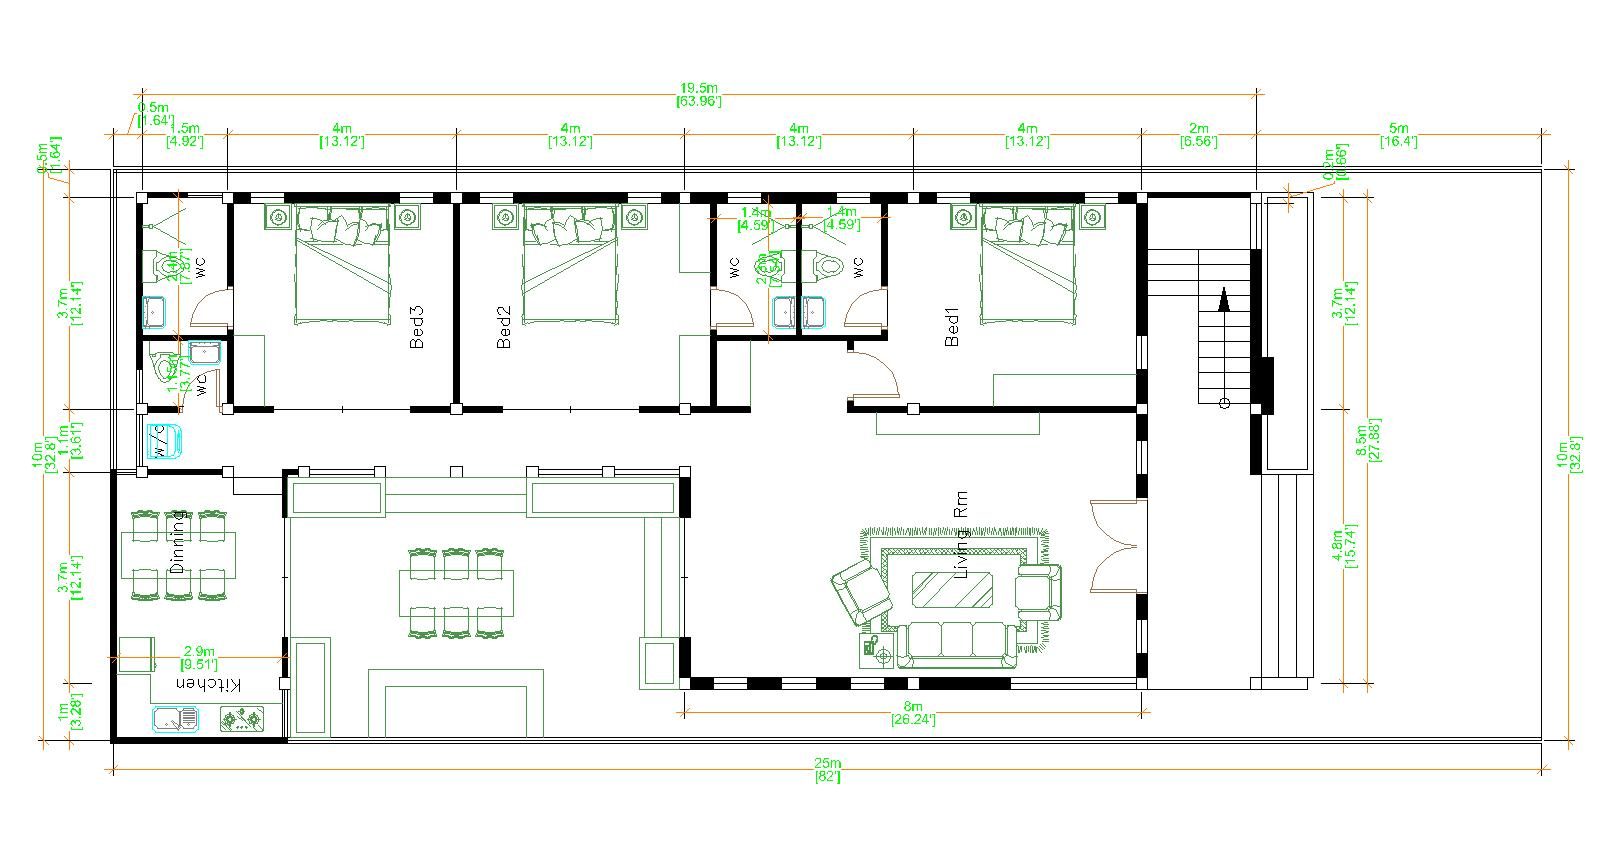 House Design Plans 10x25 with 33x82 Feet 3 bedrooms